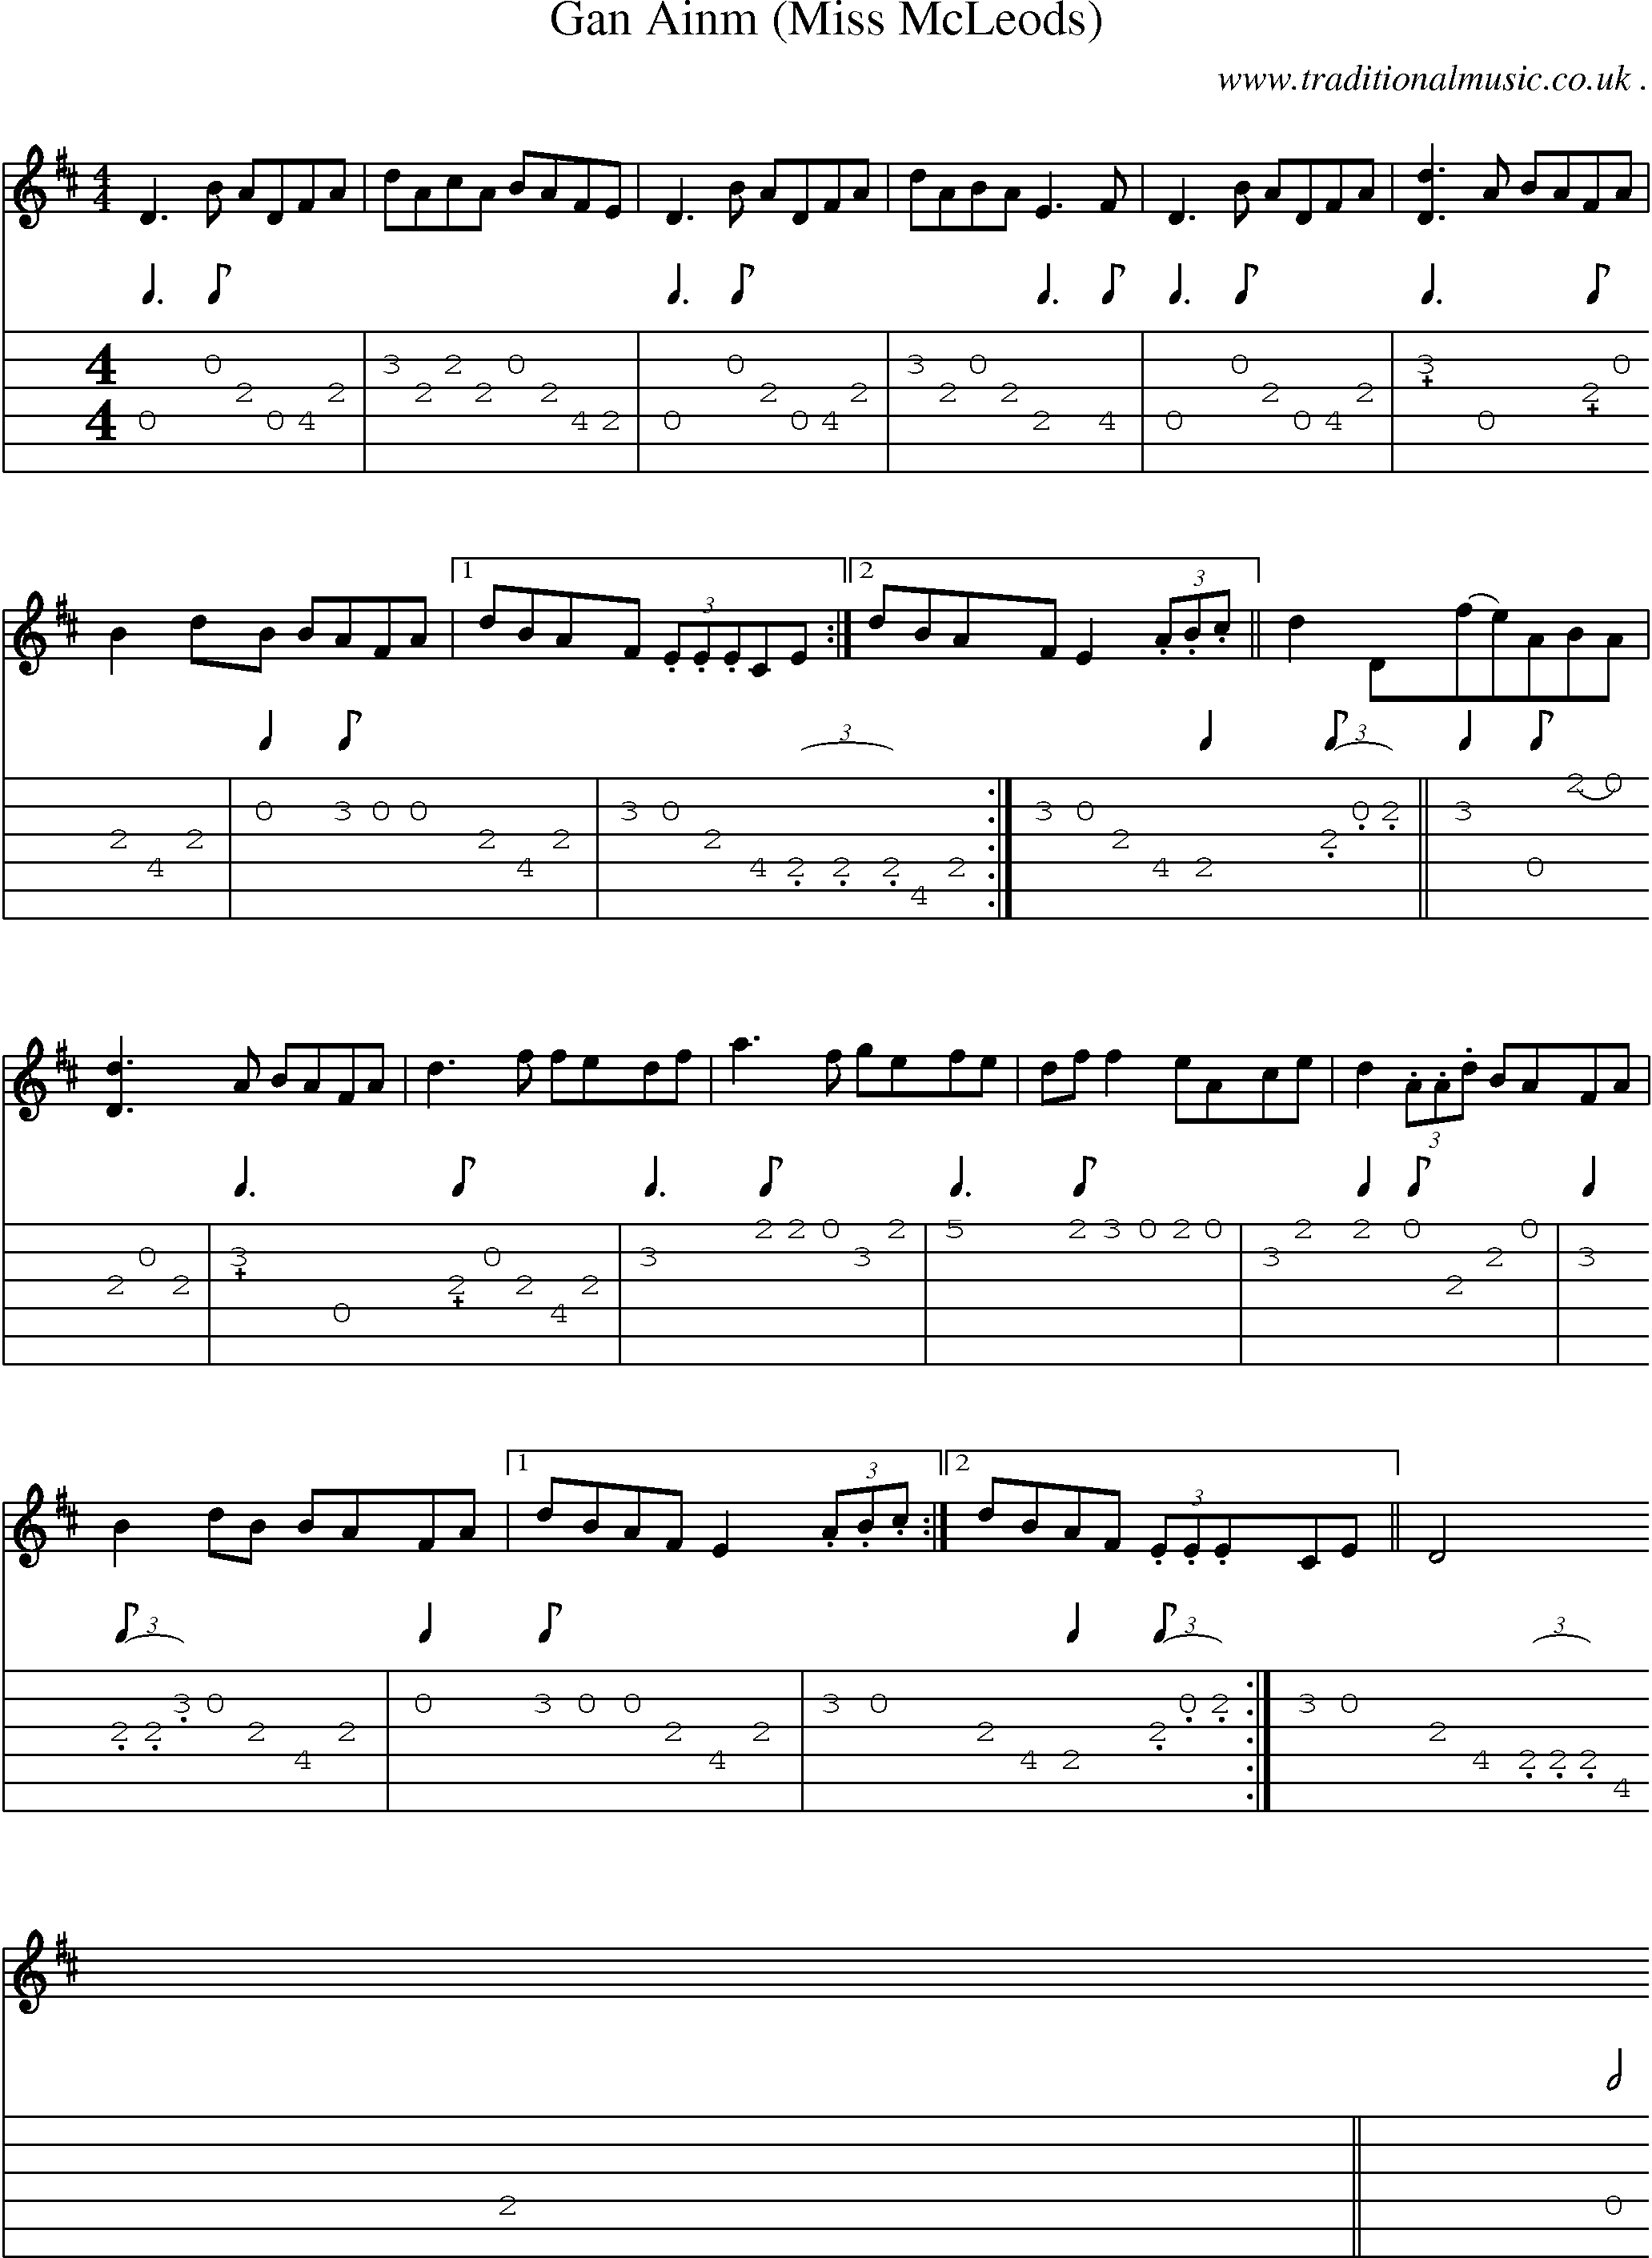 Sheet-Music and Guitar Tabs for Gan Ainm (miss Mcleods)